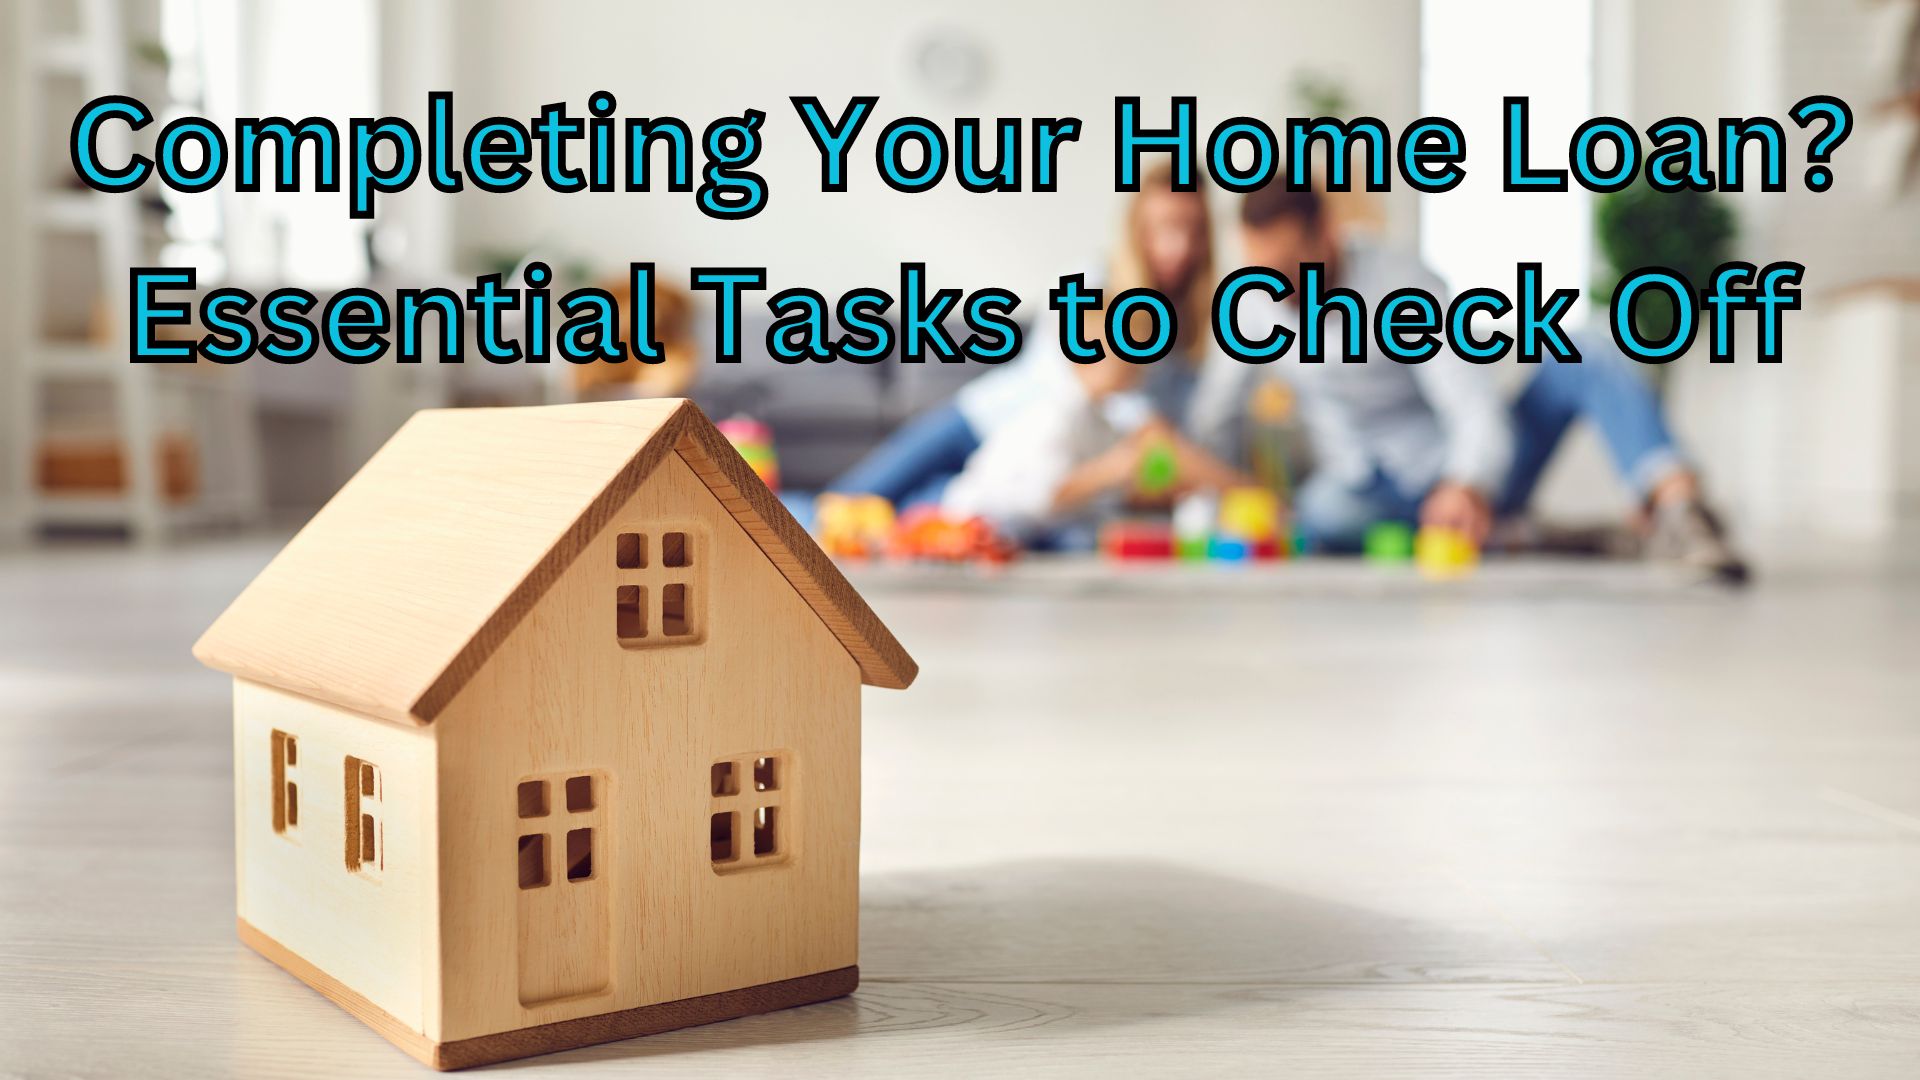 Completing Your Home Loan? Essential Tasks to Check Off